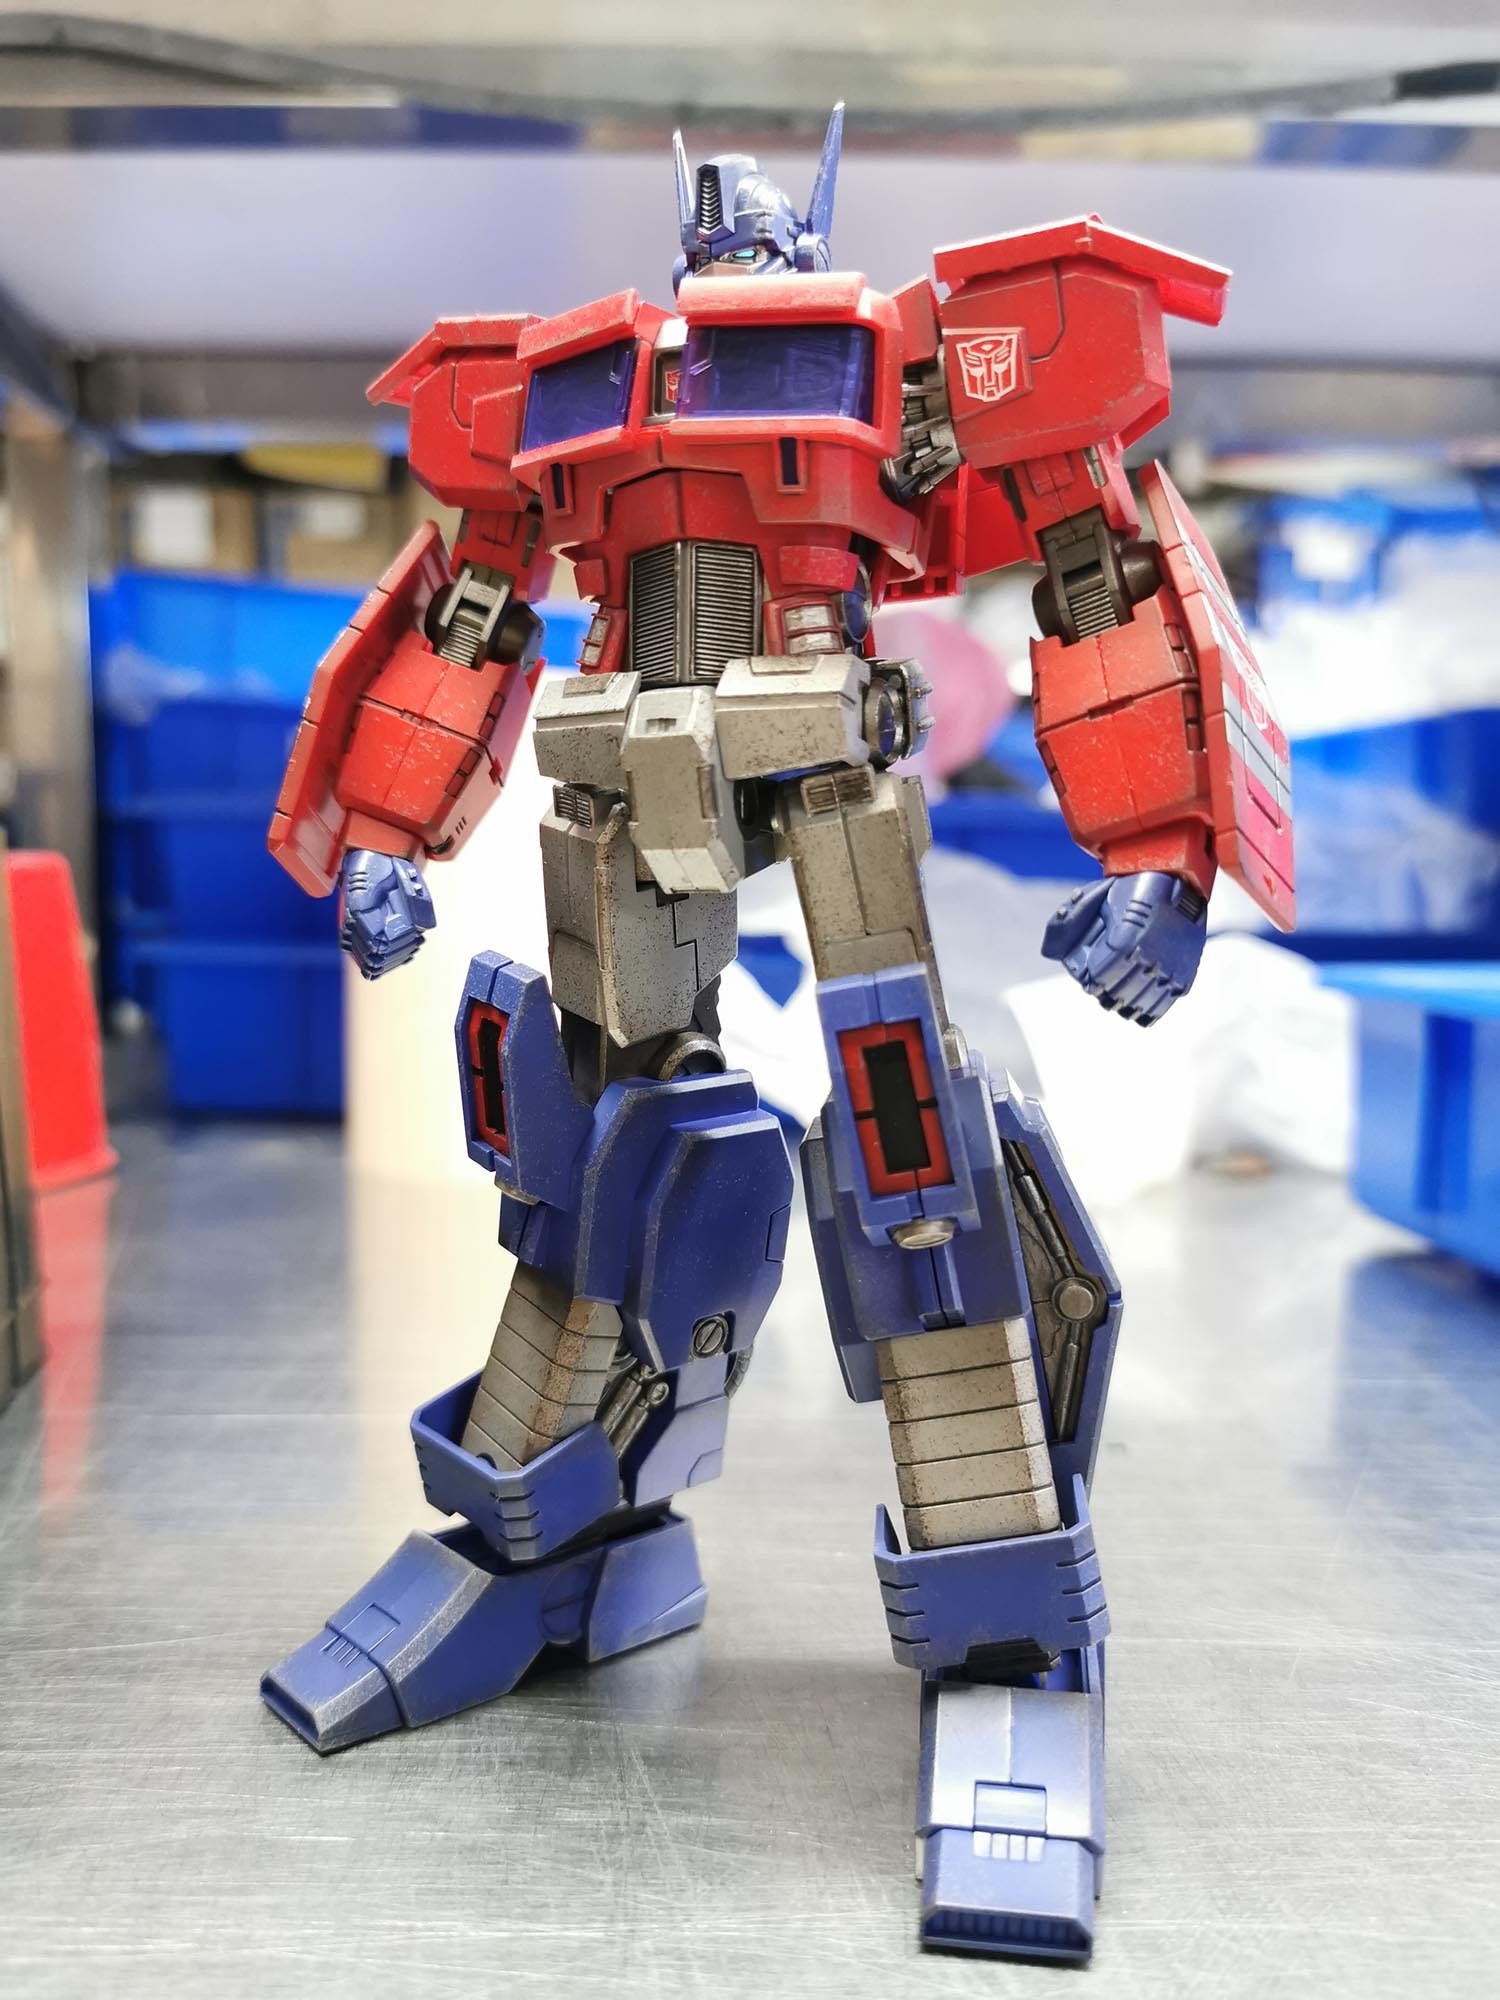 Transformers News: Flame Toys News - Skywarp and Drift Box Art Revealed, In-Hand Images of IDW Optimus Prime Assembled